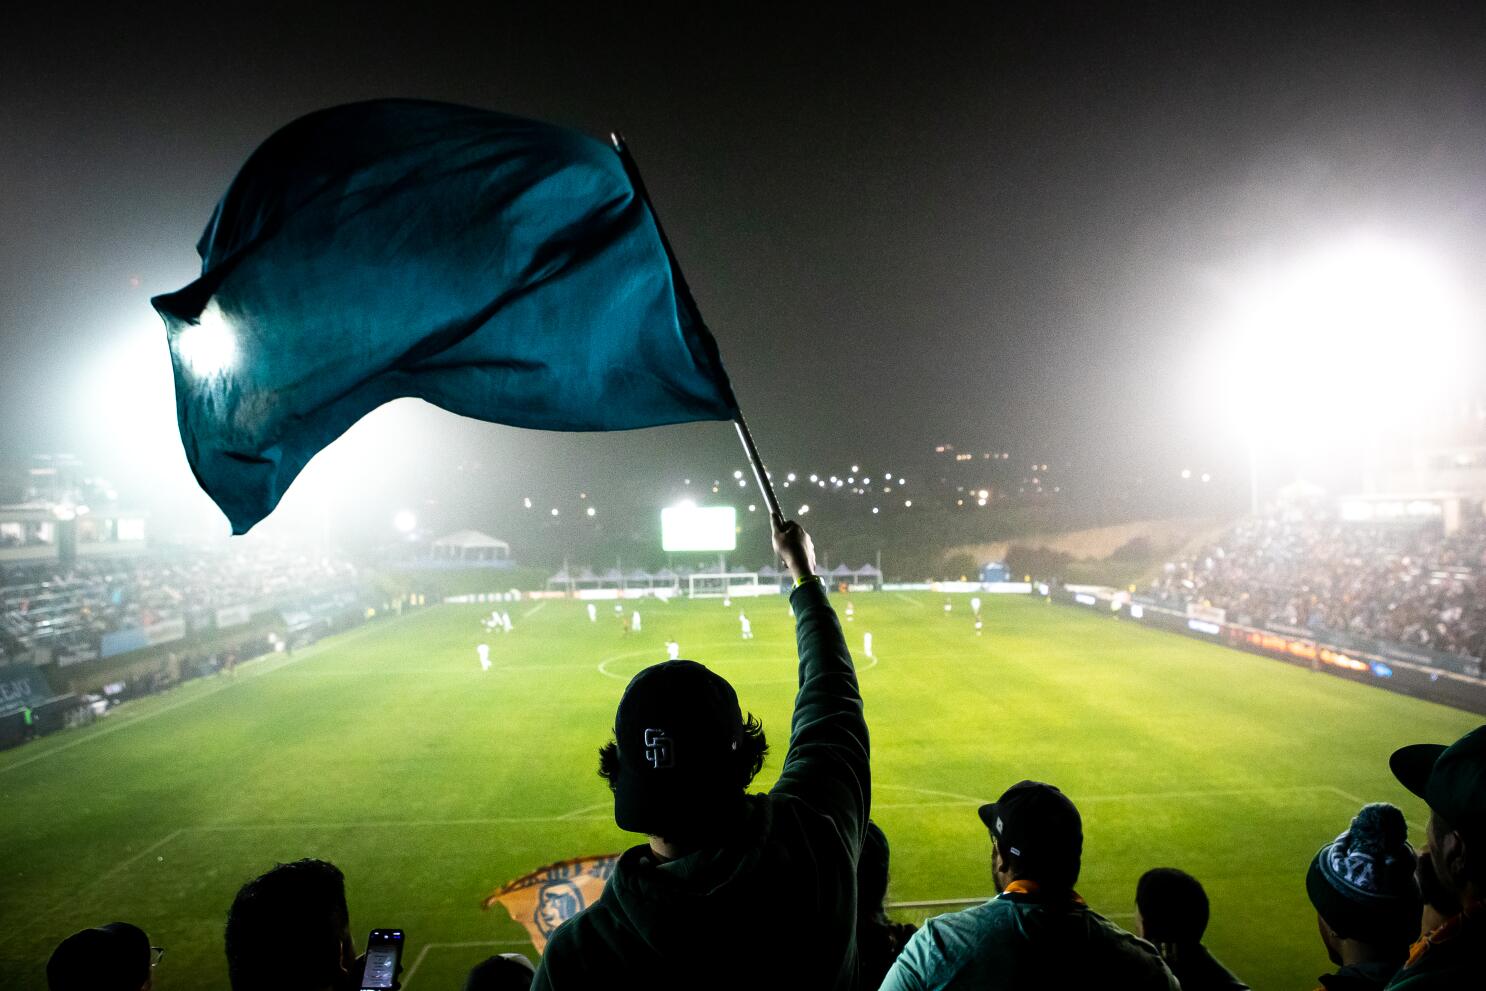 San Diego's Soccer Club Finally Has a Game You Can Attend